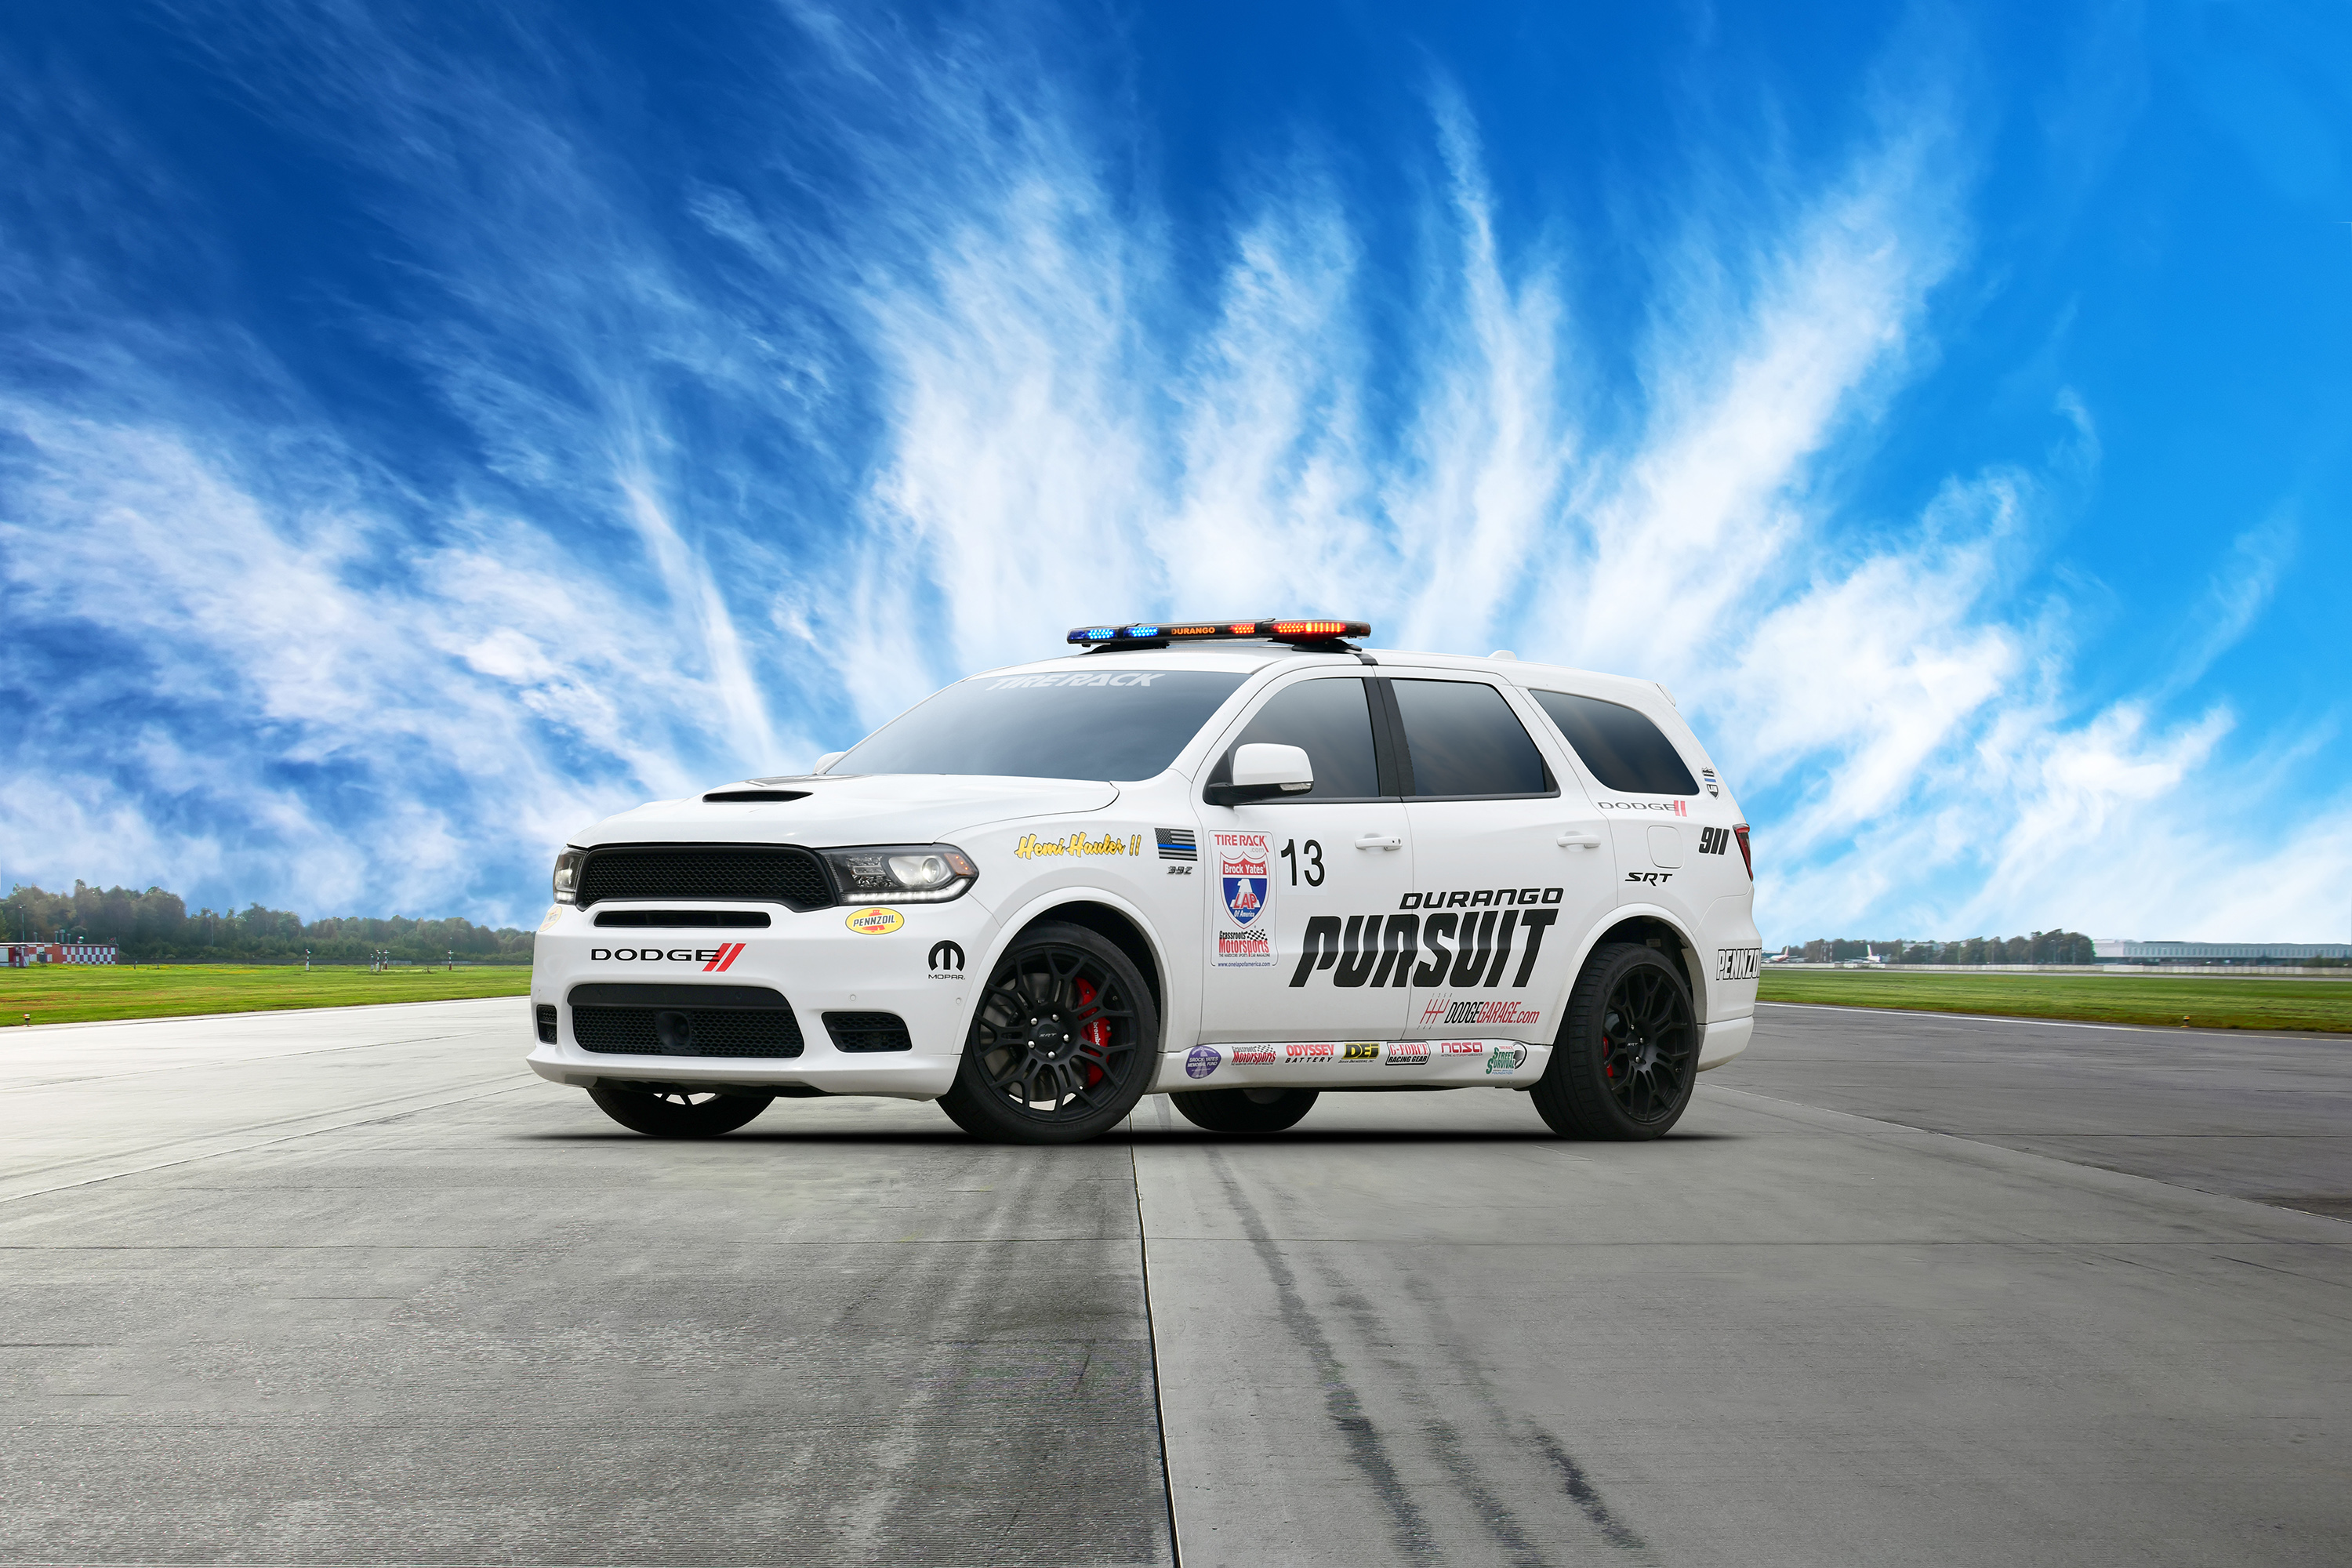 This year’s 2019 Tire Rack One Lap of America Presented by Grassroots Motorsports Magazine kicks off May 4 in South Bend, Ind., and Dodge//SRT is defending the Dodge Durango SRT’s 2018 One Lap truck/SUV class title, upping its game with a new Durango SRT Pursuit concept called “Speed Trap.” 